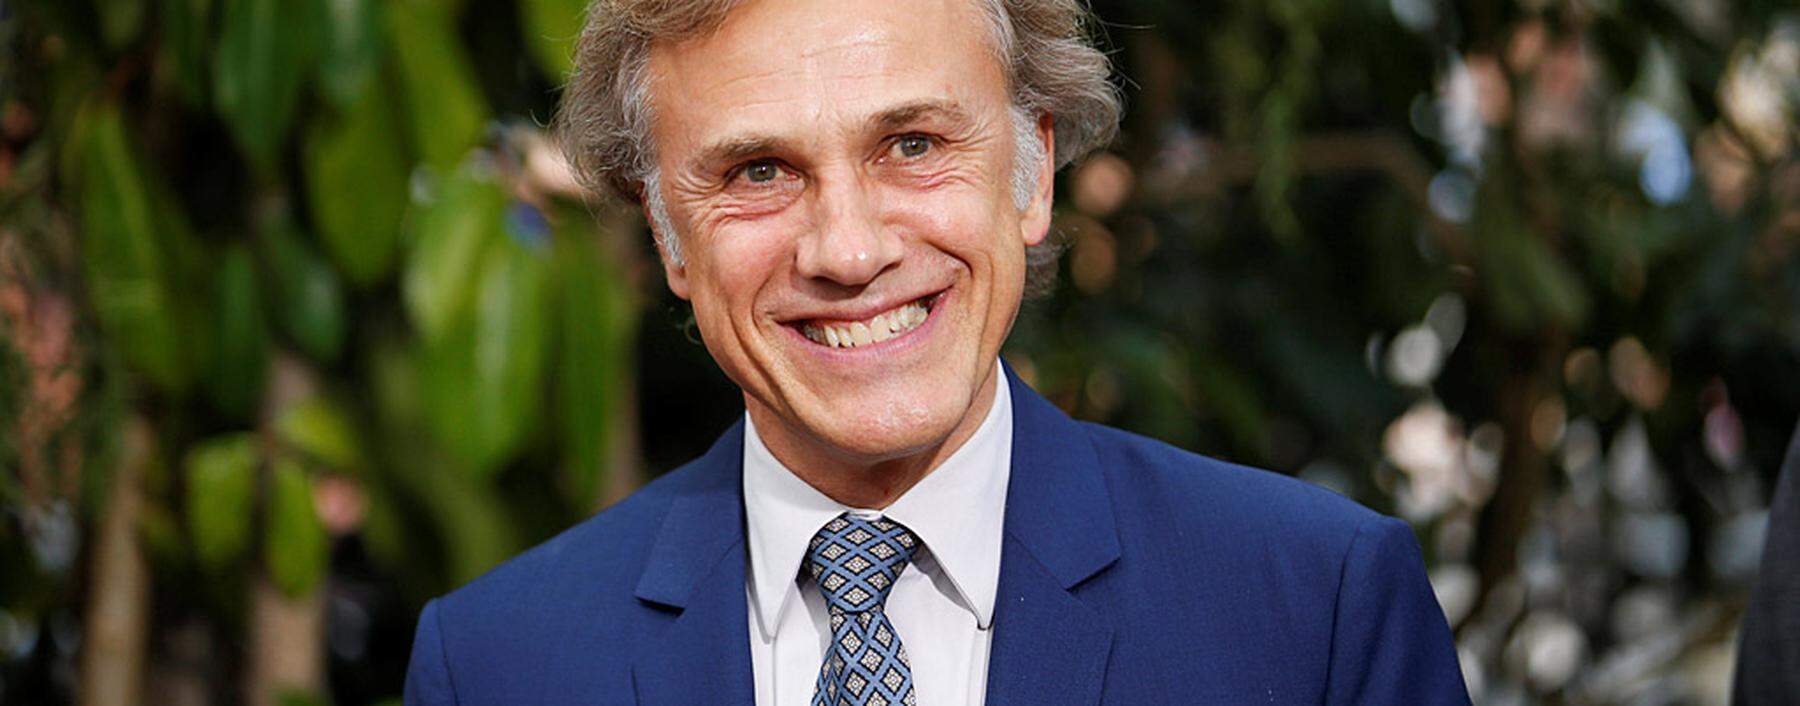 Cast member Christoph Waltz poses at the premiere of the movie ´The Legend of Tarzan´ in Hollywood, California